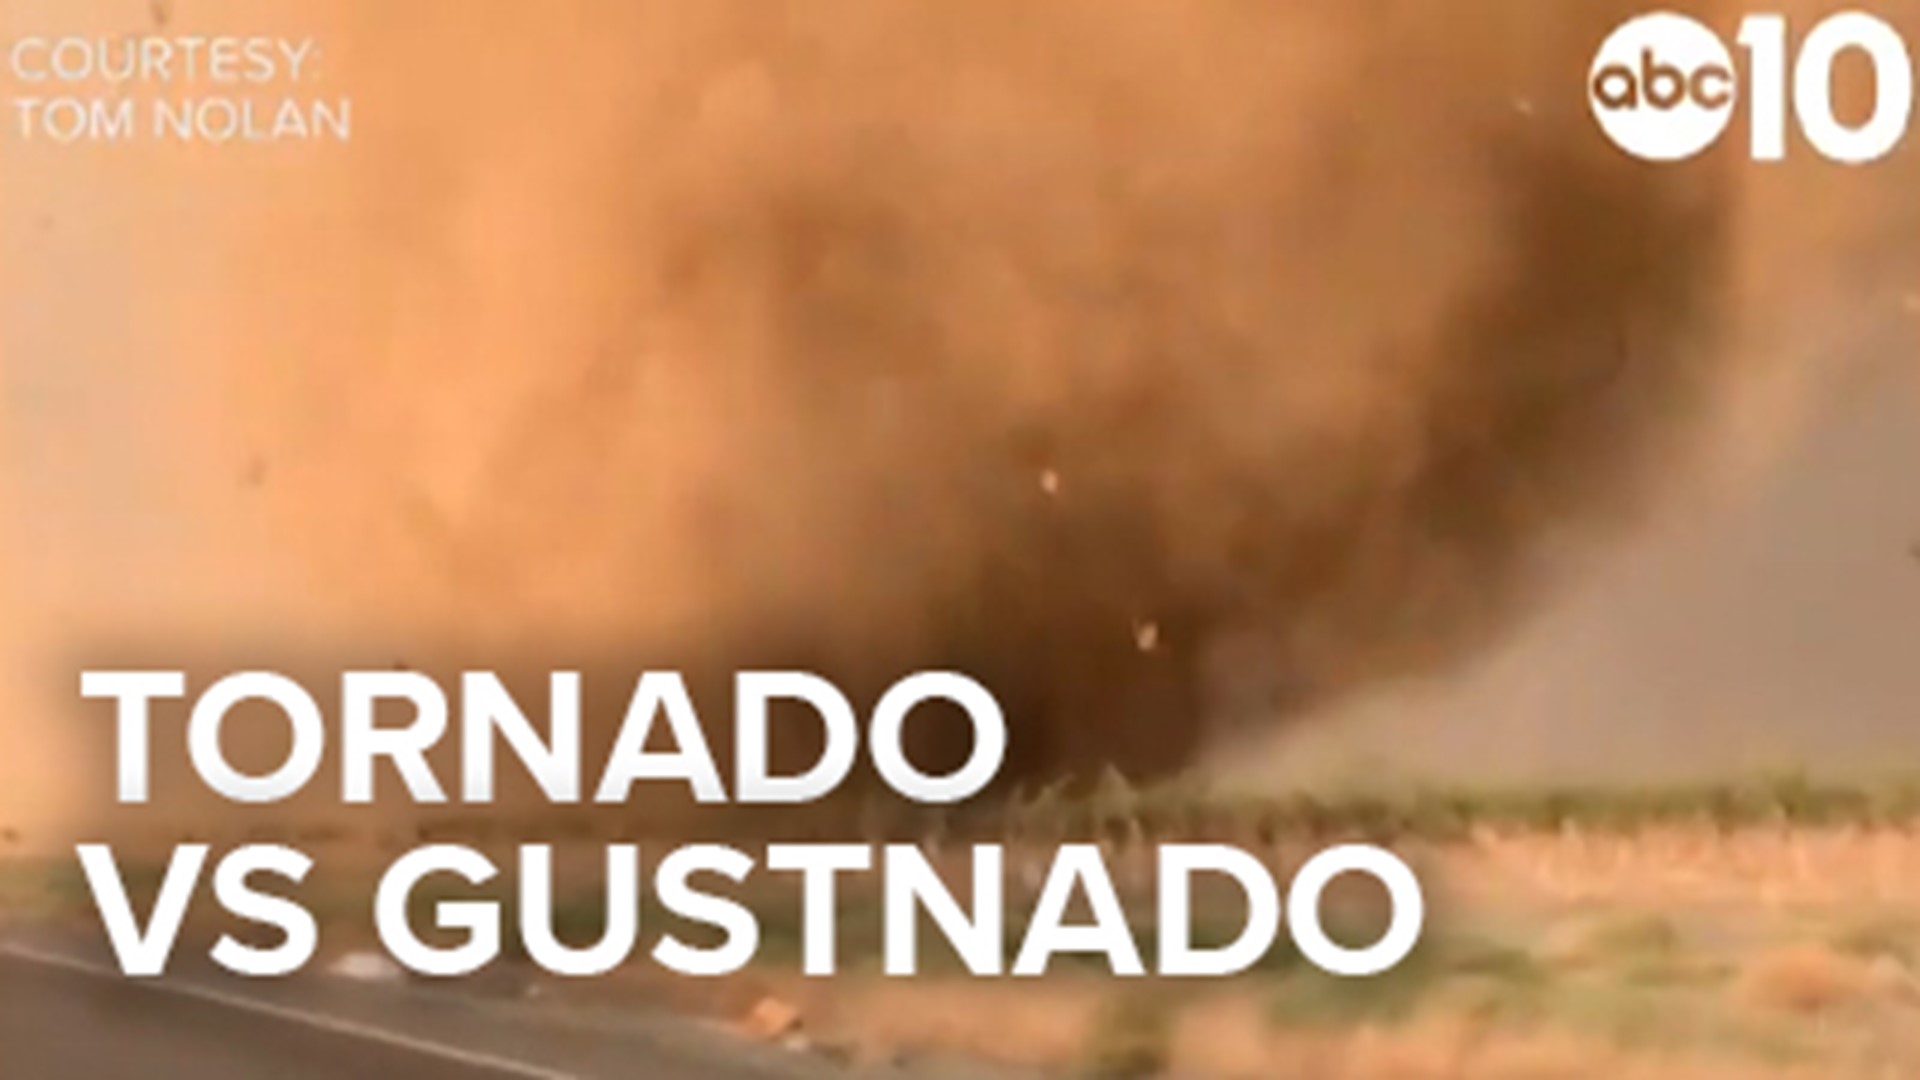 Was it a tornado or a gustnado in Davis, California? It turns out both. Carley Gomez explains the difference between the two and why both can be dangerous.